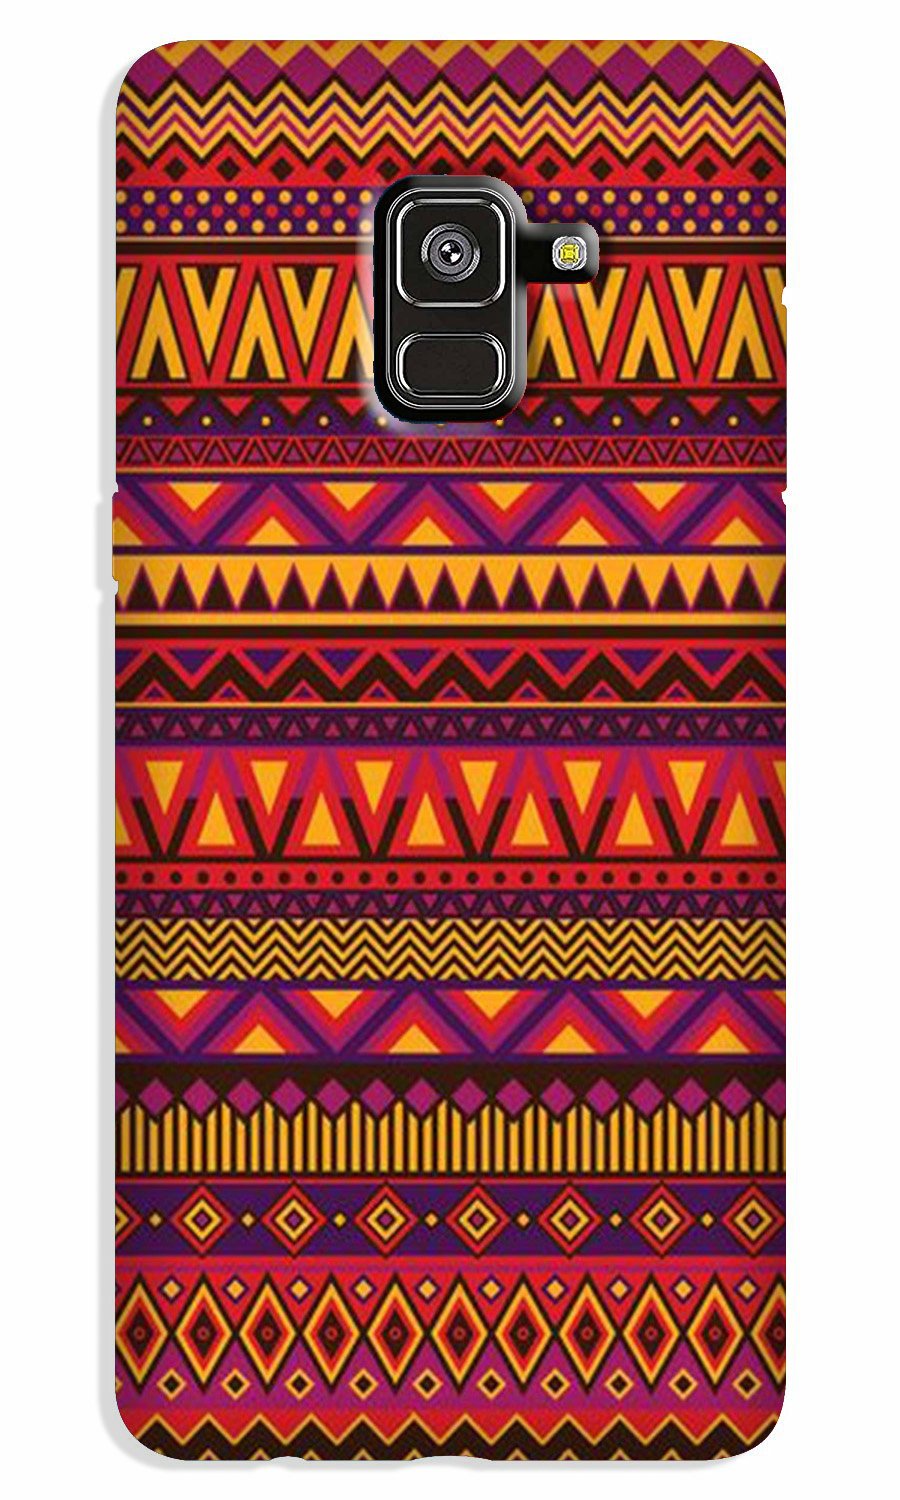 Zigzag line pattern2 Case for Galaxy J6 / On6